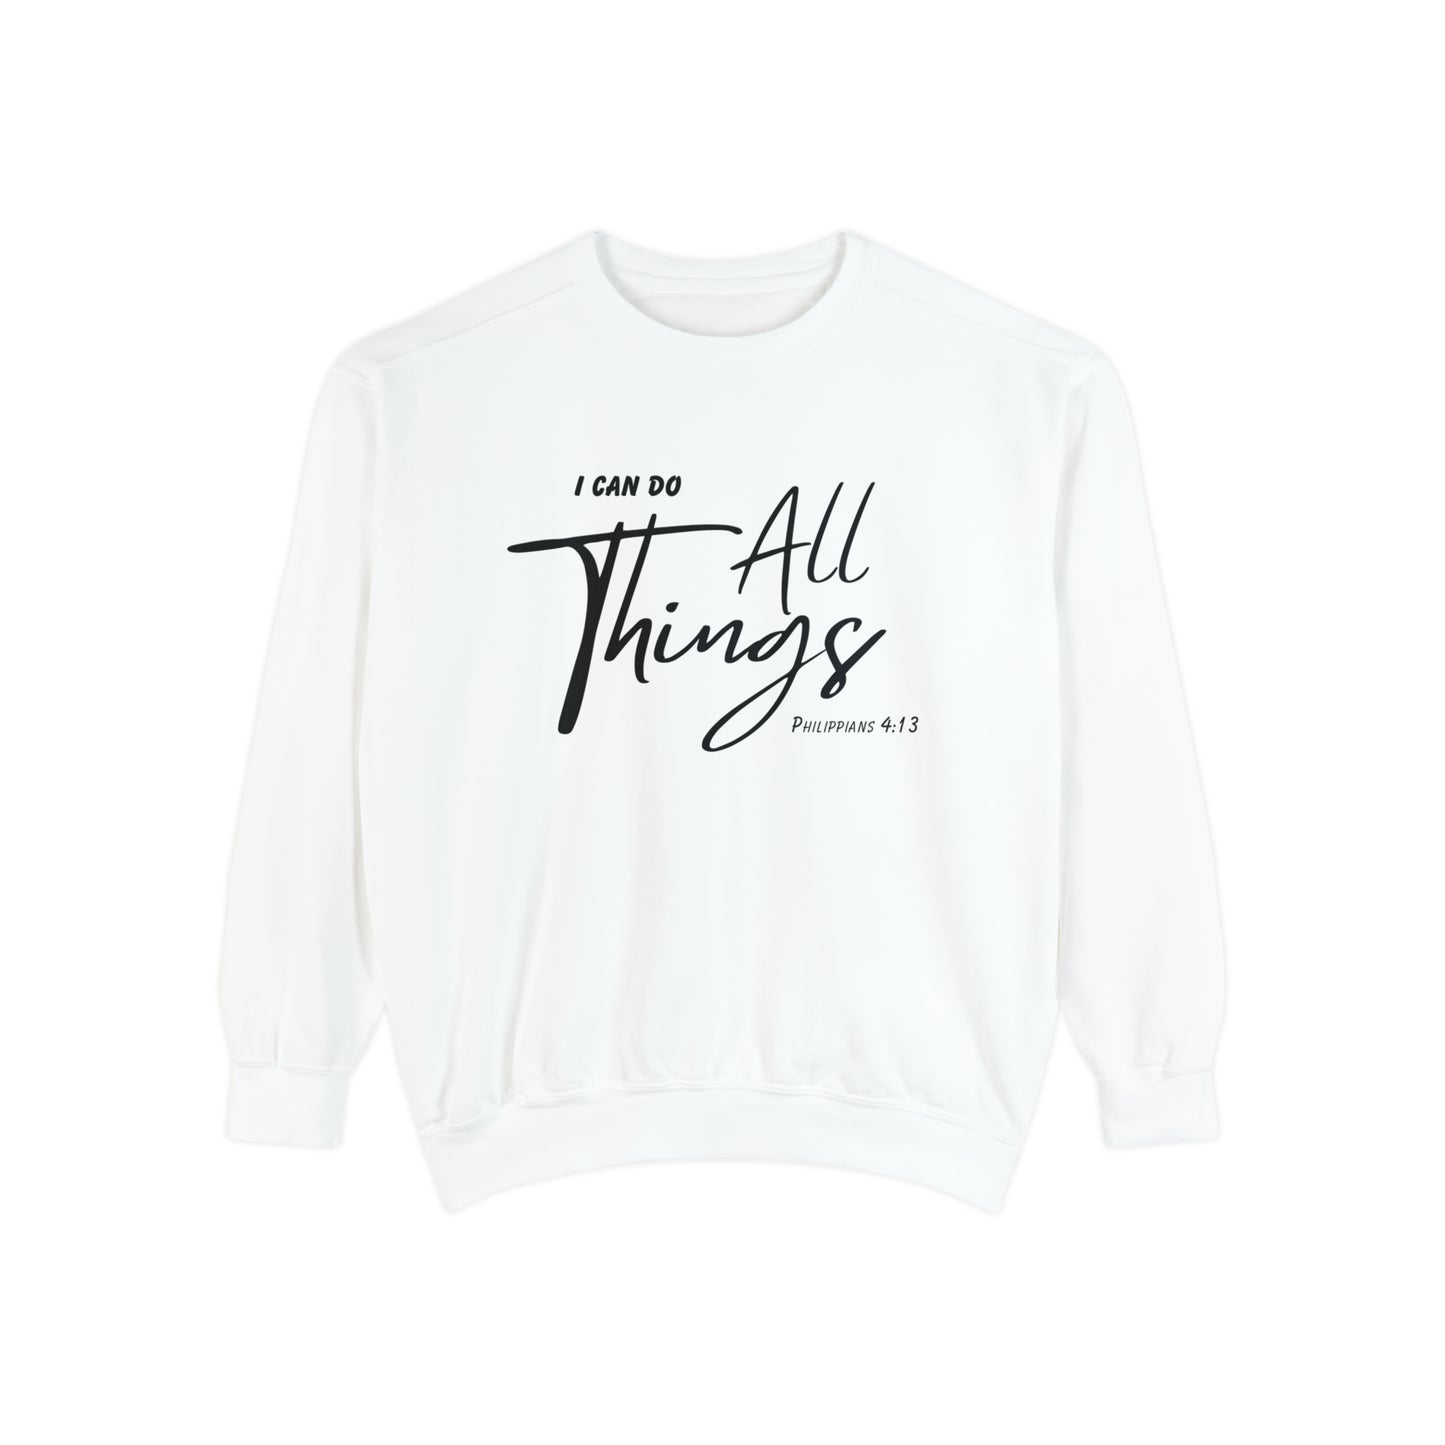 I Can Do All Things Heavyweight Crewneck